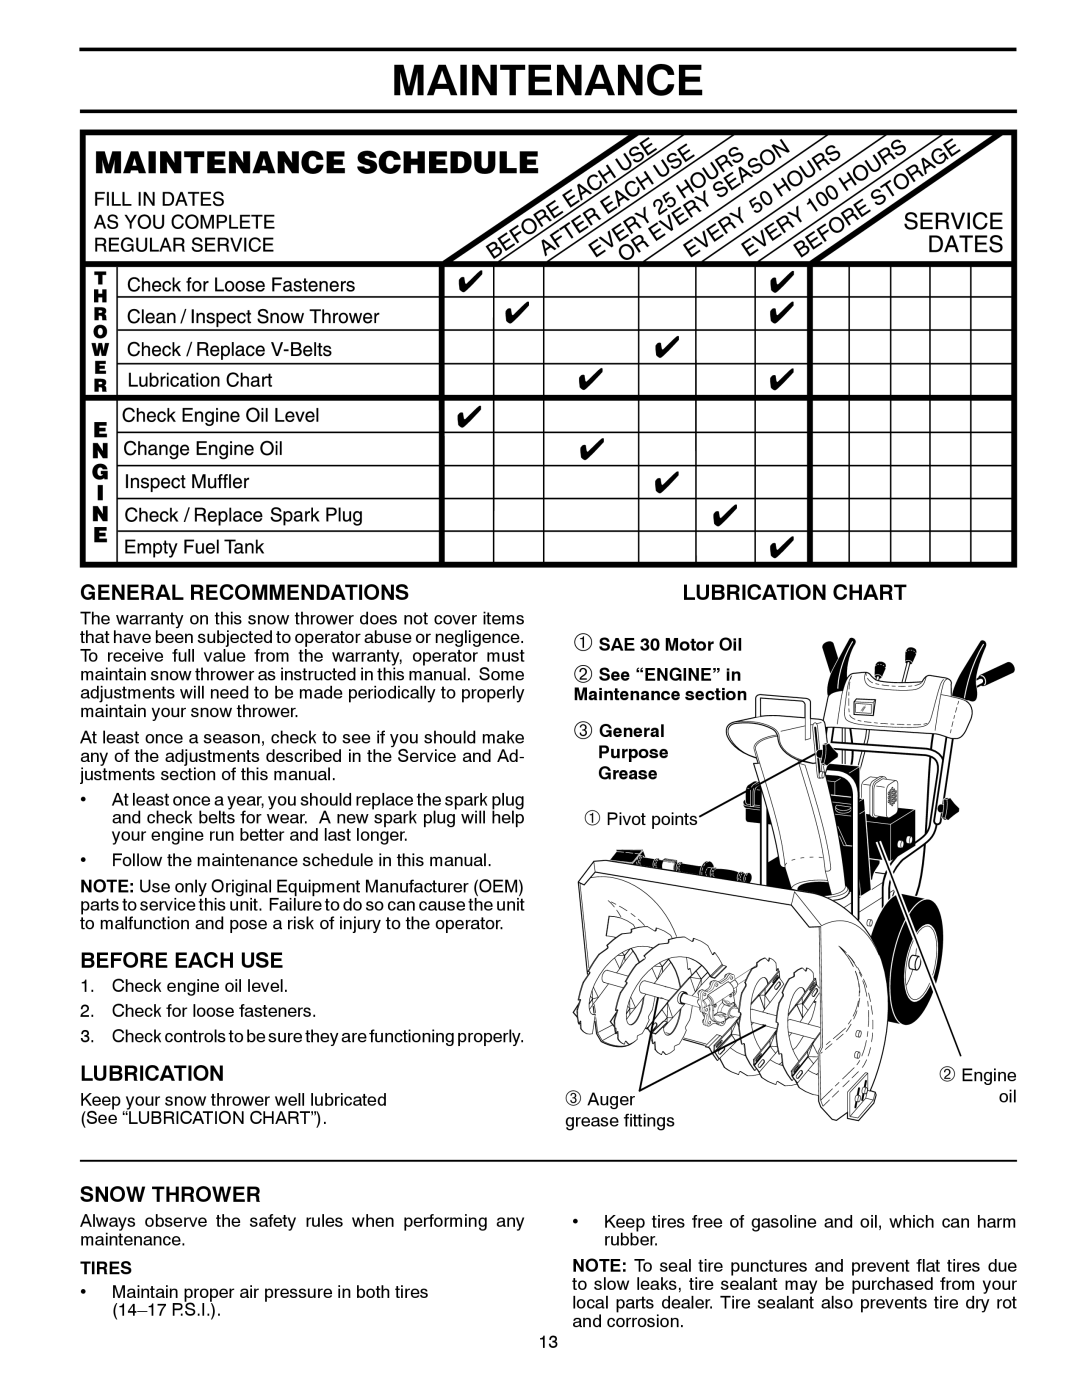 McCulloch MC627ES Maintenance, General Recommendations, Before Each Use, Snow Thrower, Lubrication Chart, Tires 